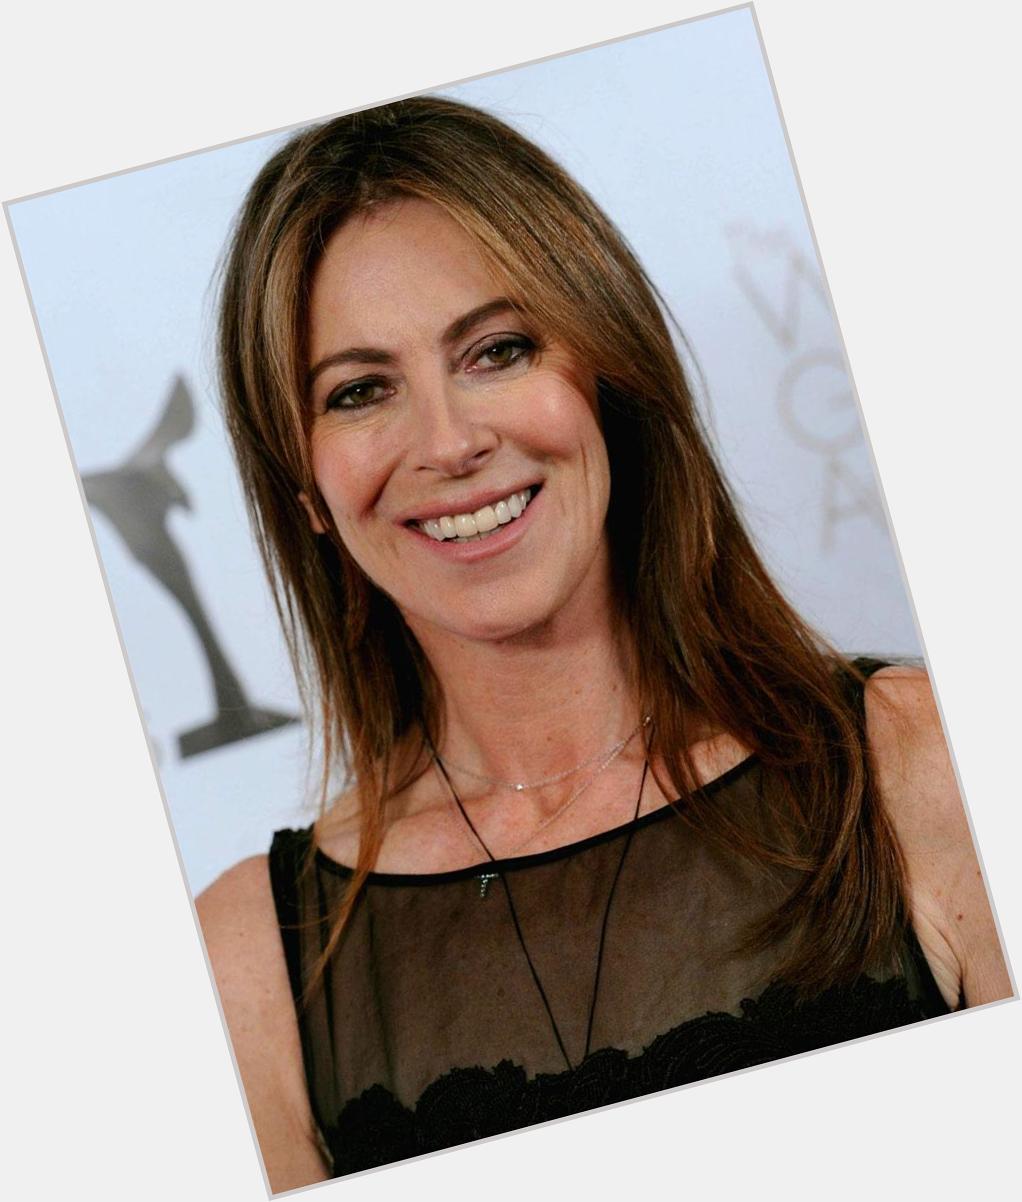 Happy Birthday 2 Kathryn Bigelow! She directed Rising Sons epi of Ah sexy Paige 